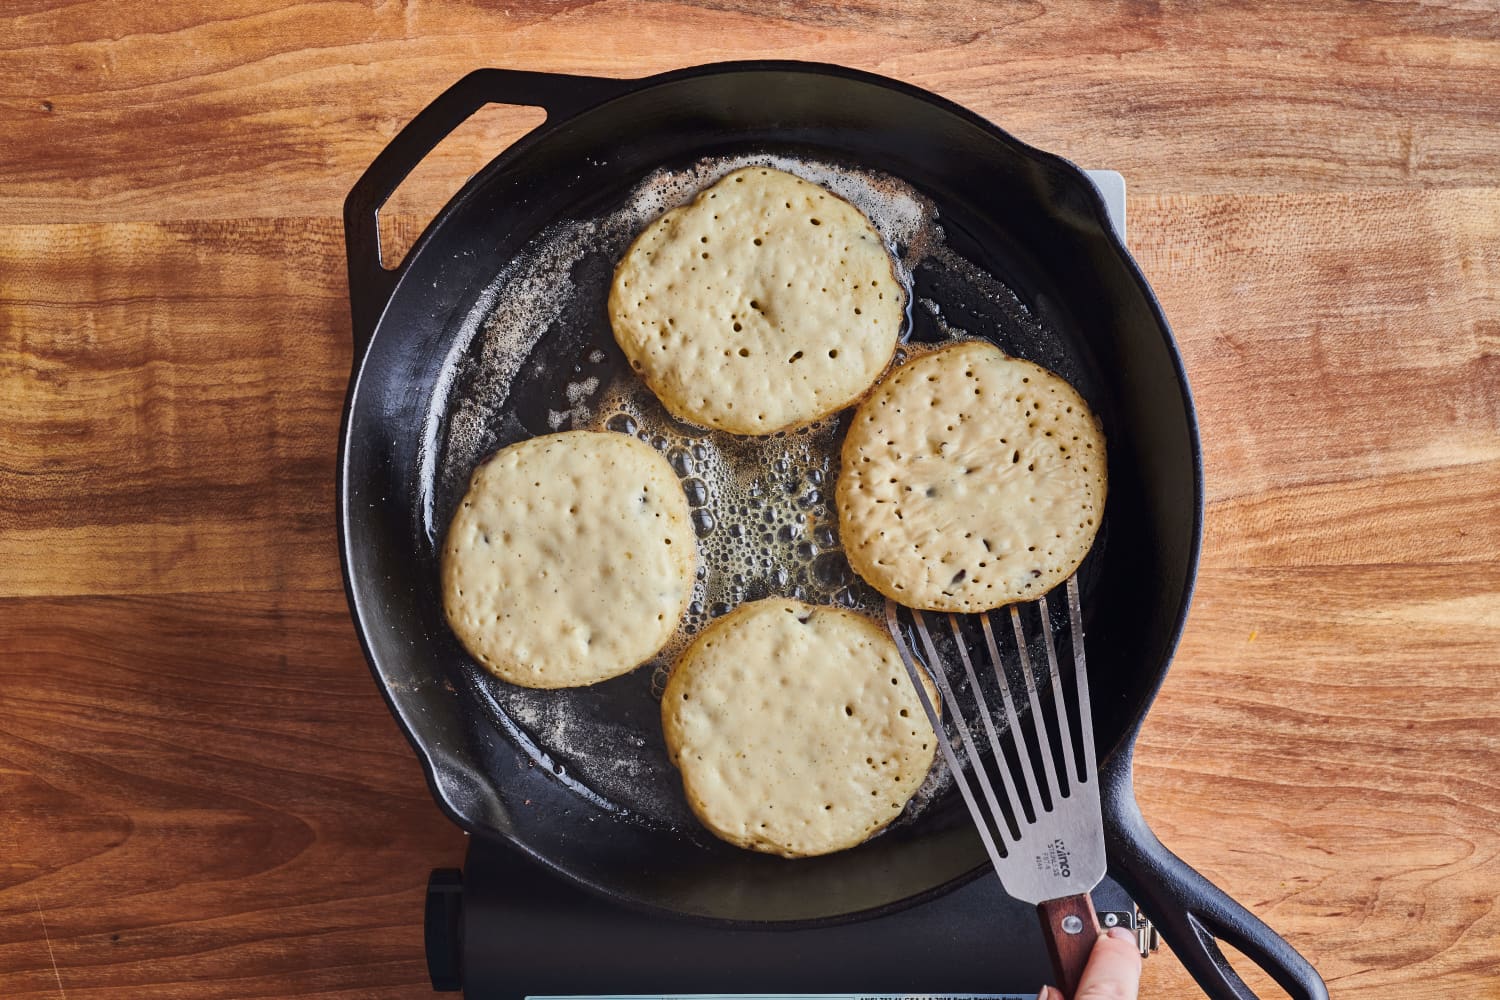 This Editor-Favorite Cookware Brand is Home to Some of the Coolest Cast-Iron Accessories Around